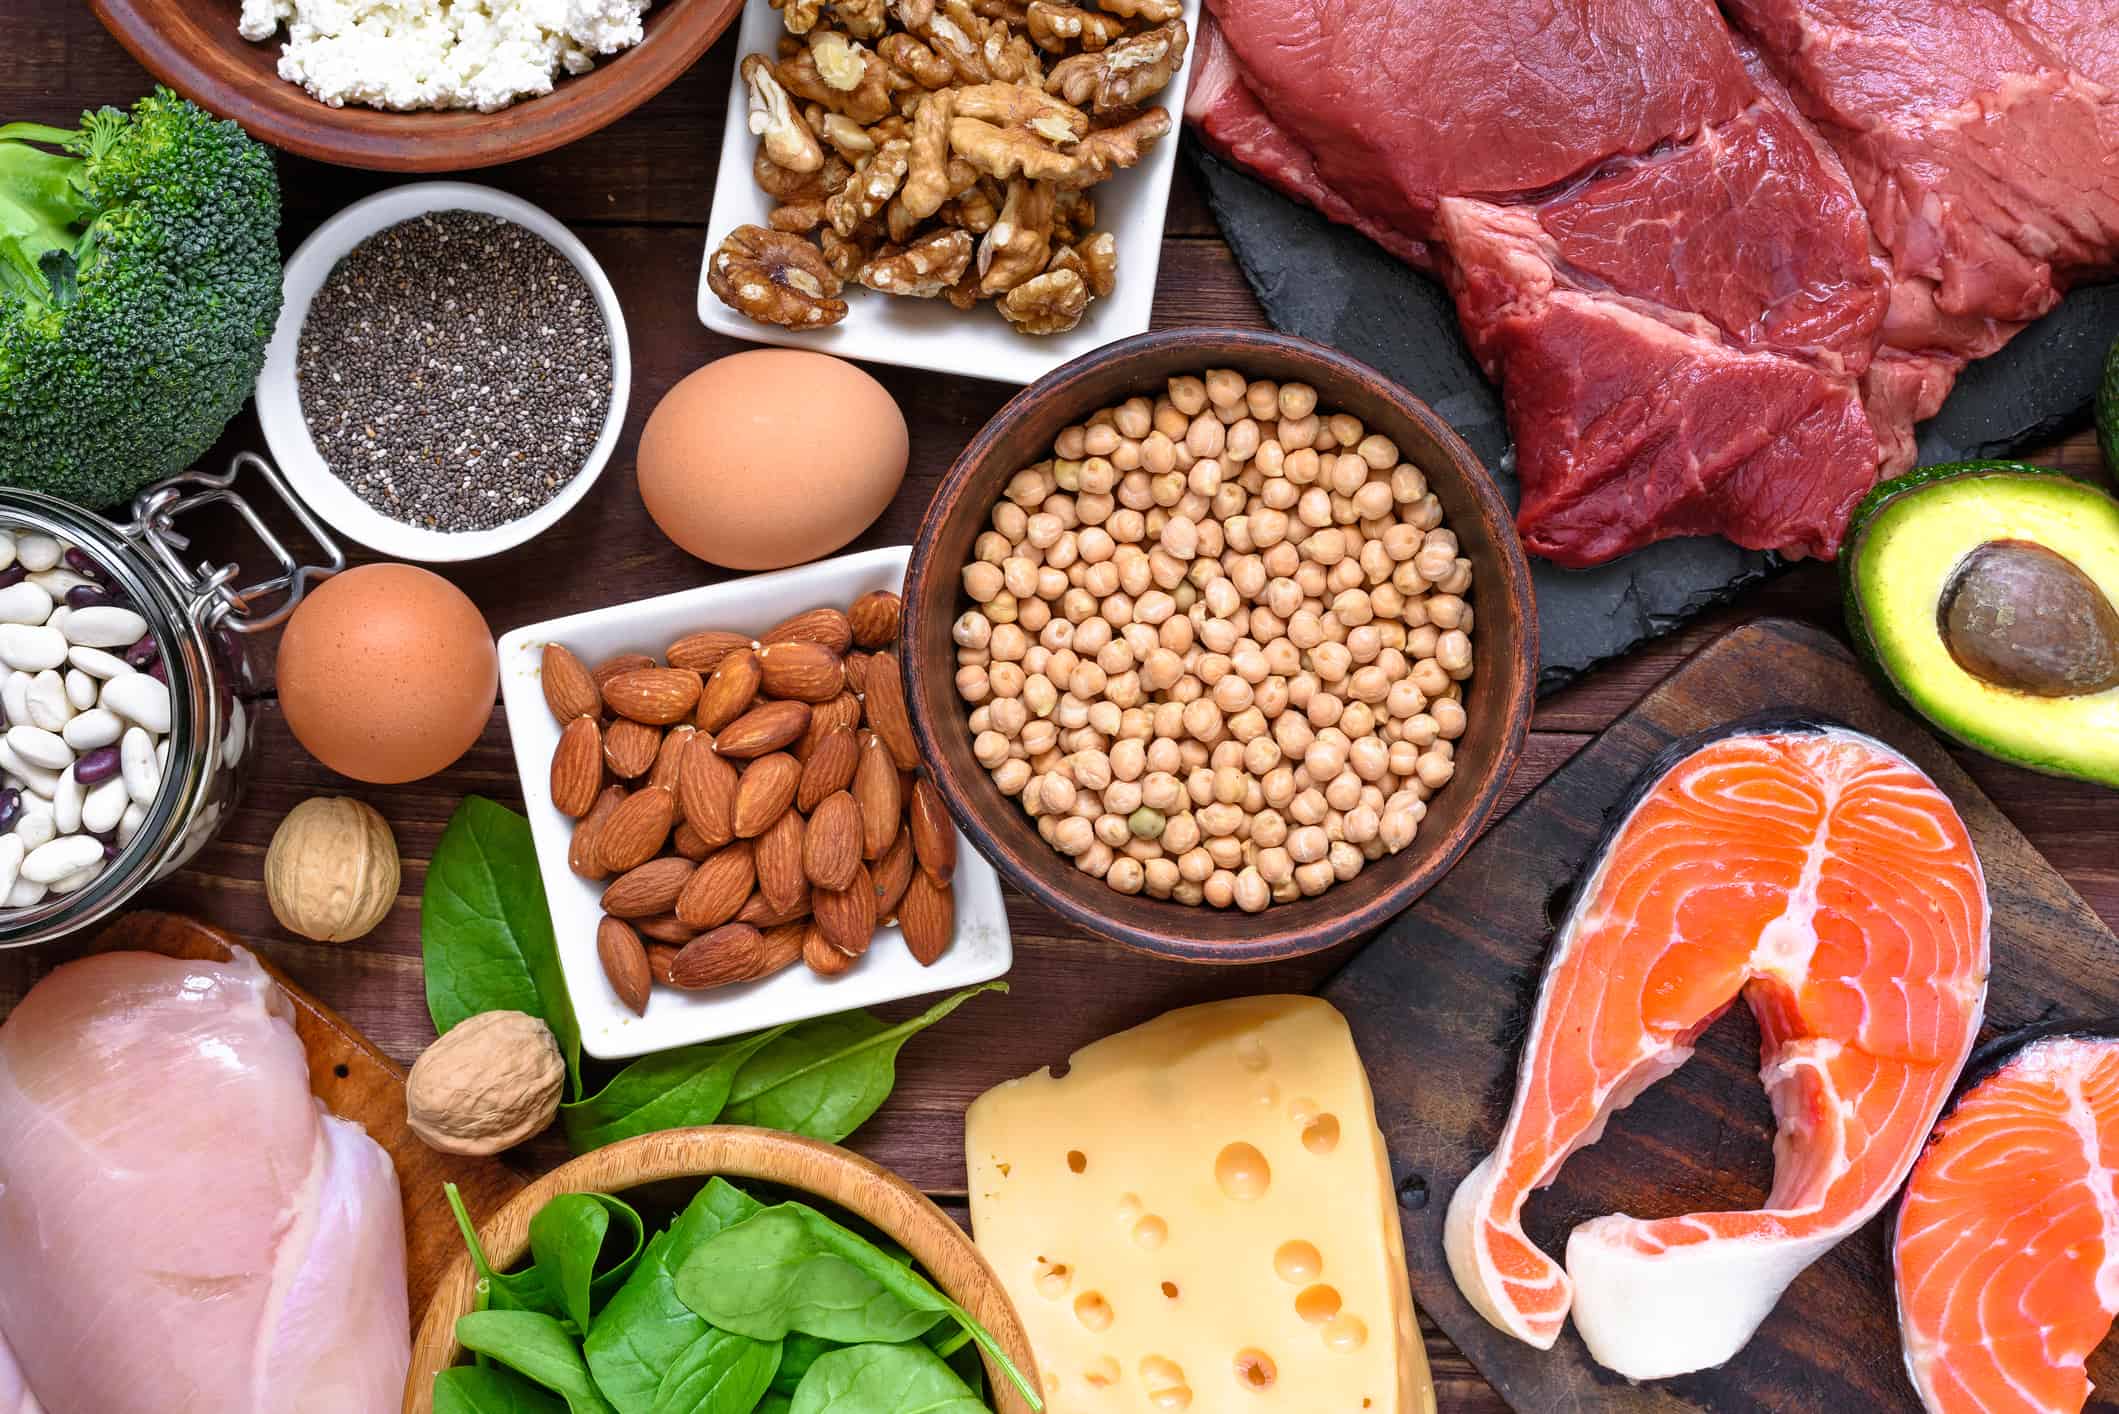 research on protein intake